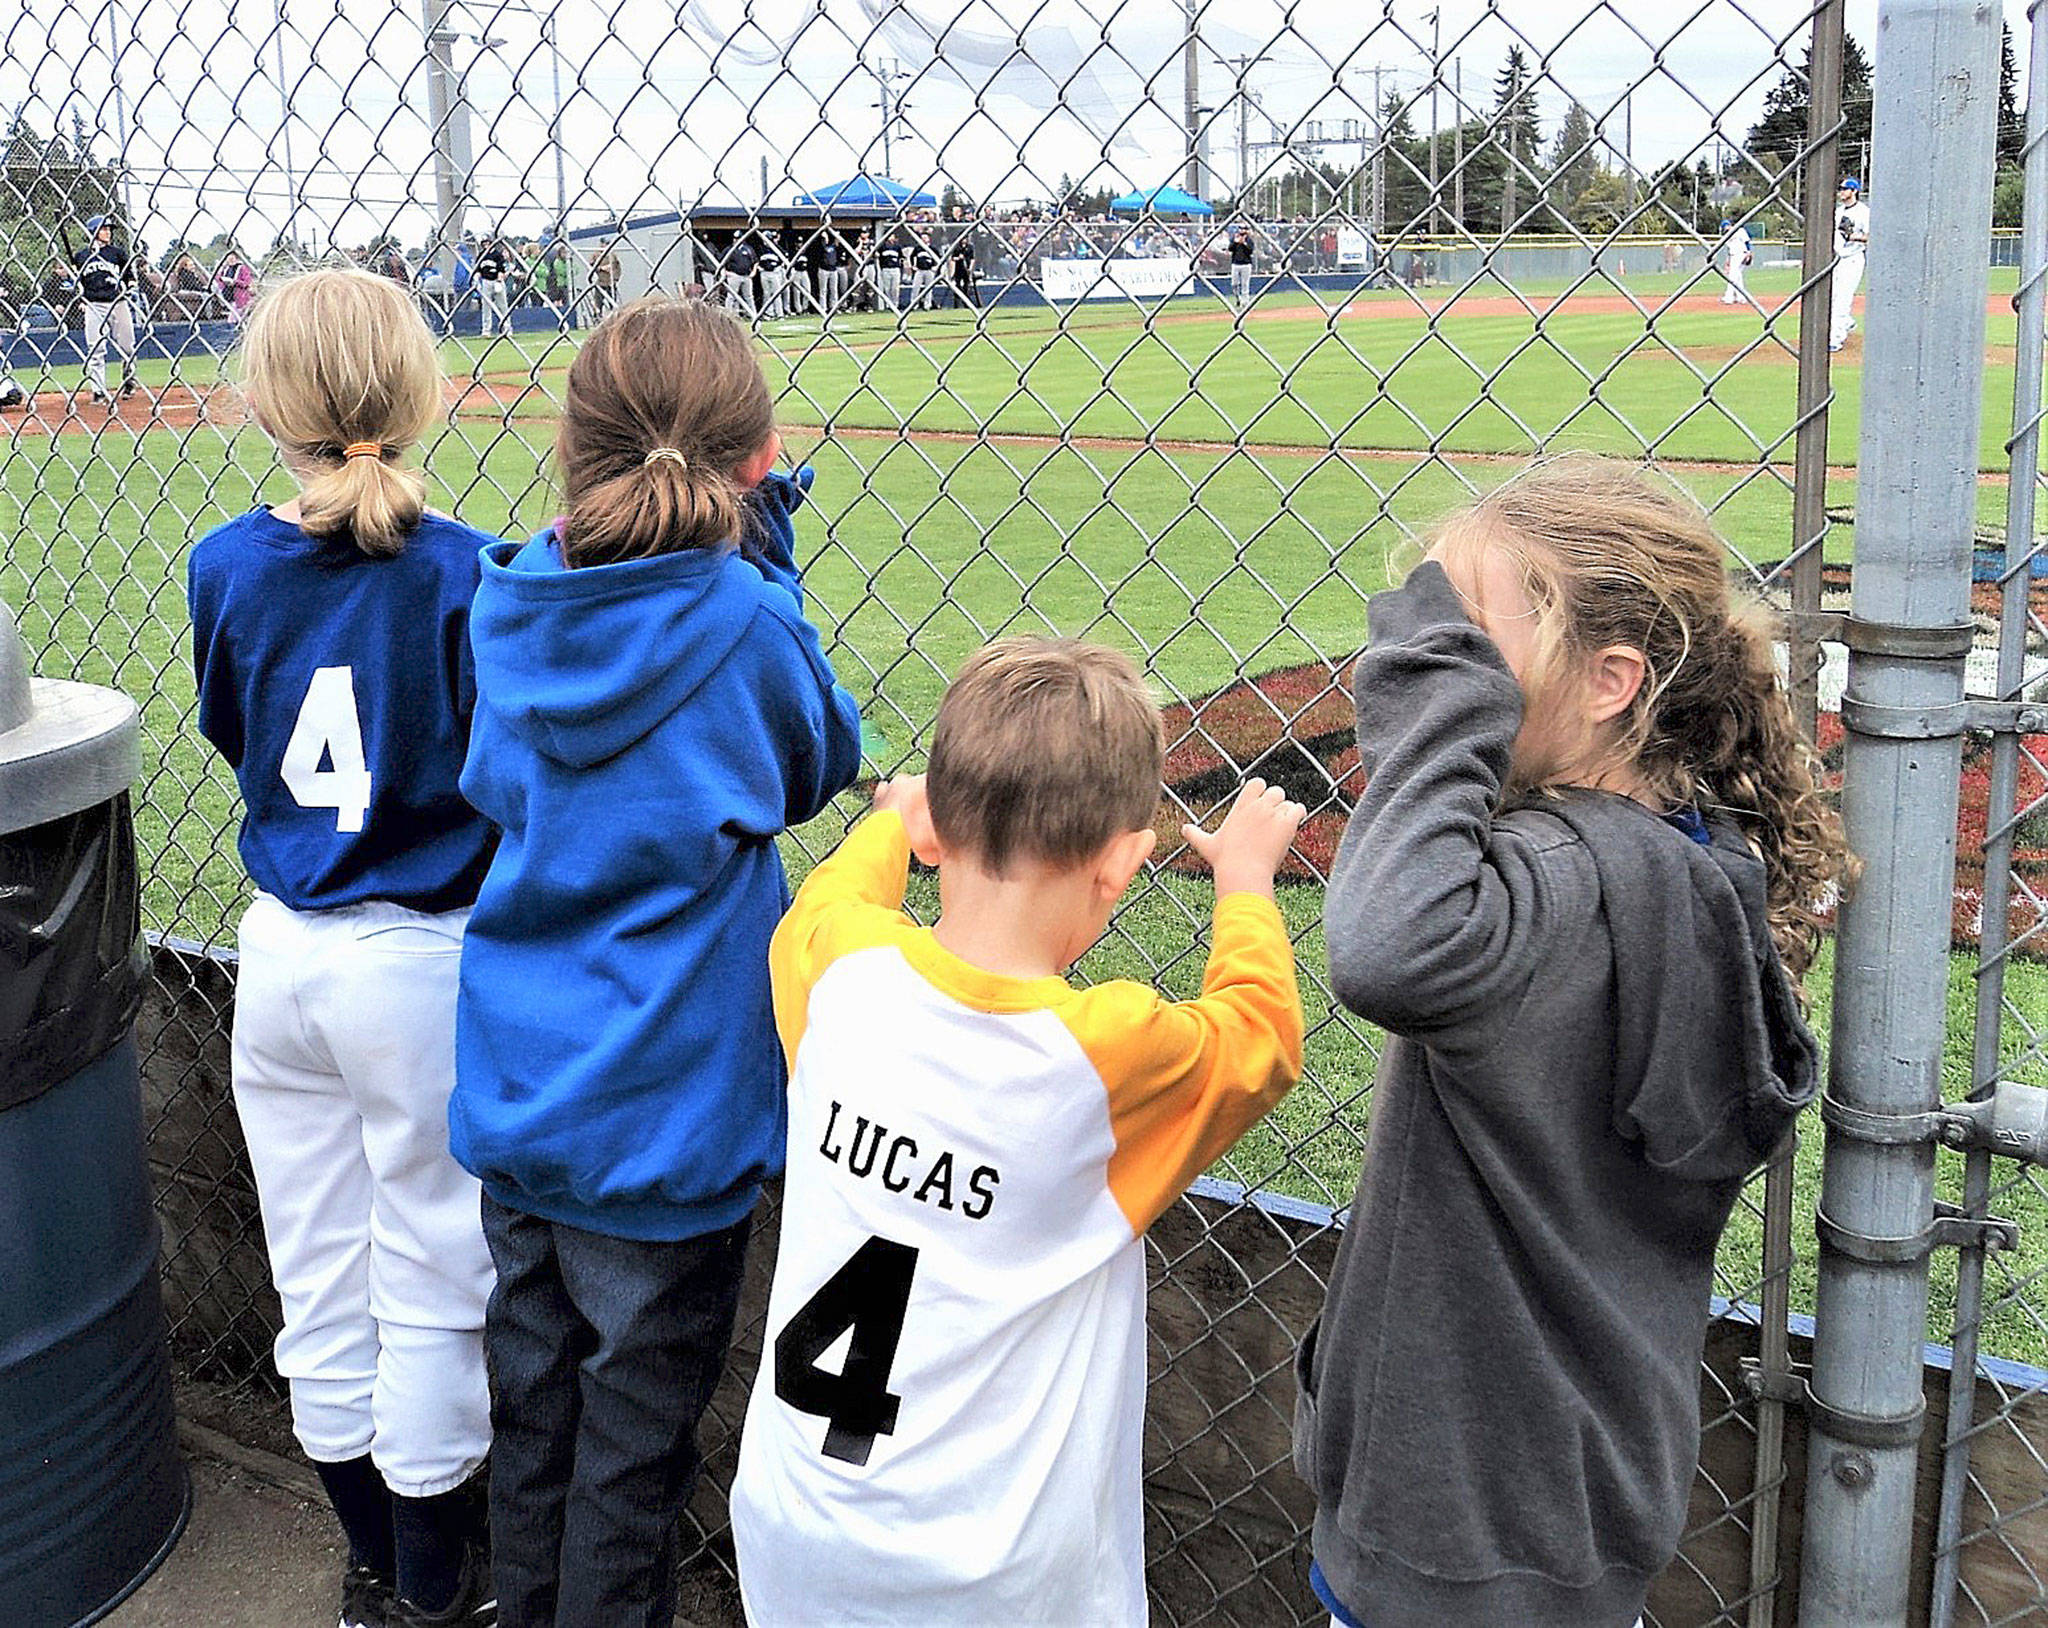 From left Ava Fox, Catie Chance, Lucas Chance and Addison Fox get up close to the action and the players at the Port Angeles Lefties’ inaugural game. (Pierre LaBossiere/Peninsula Daily News)